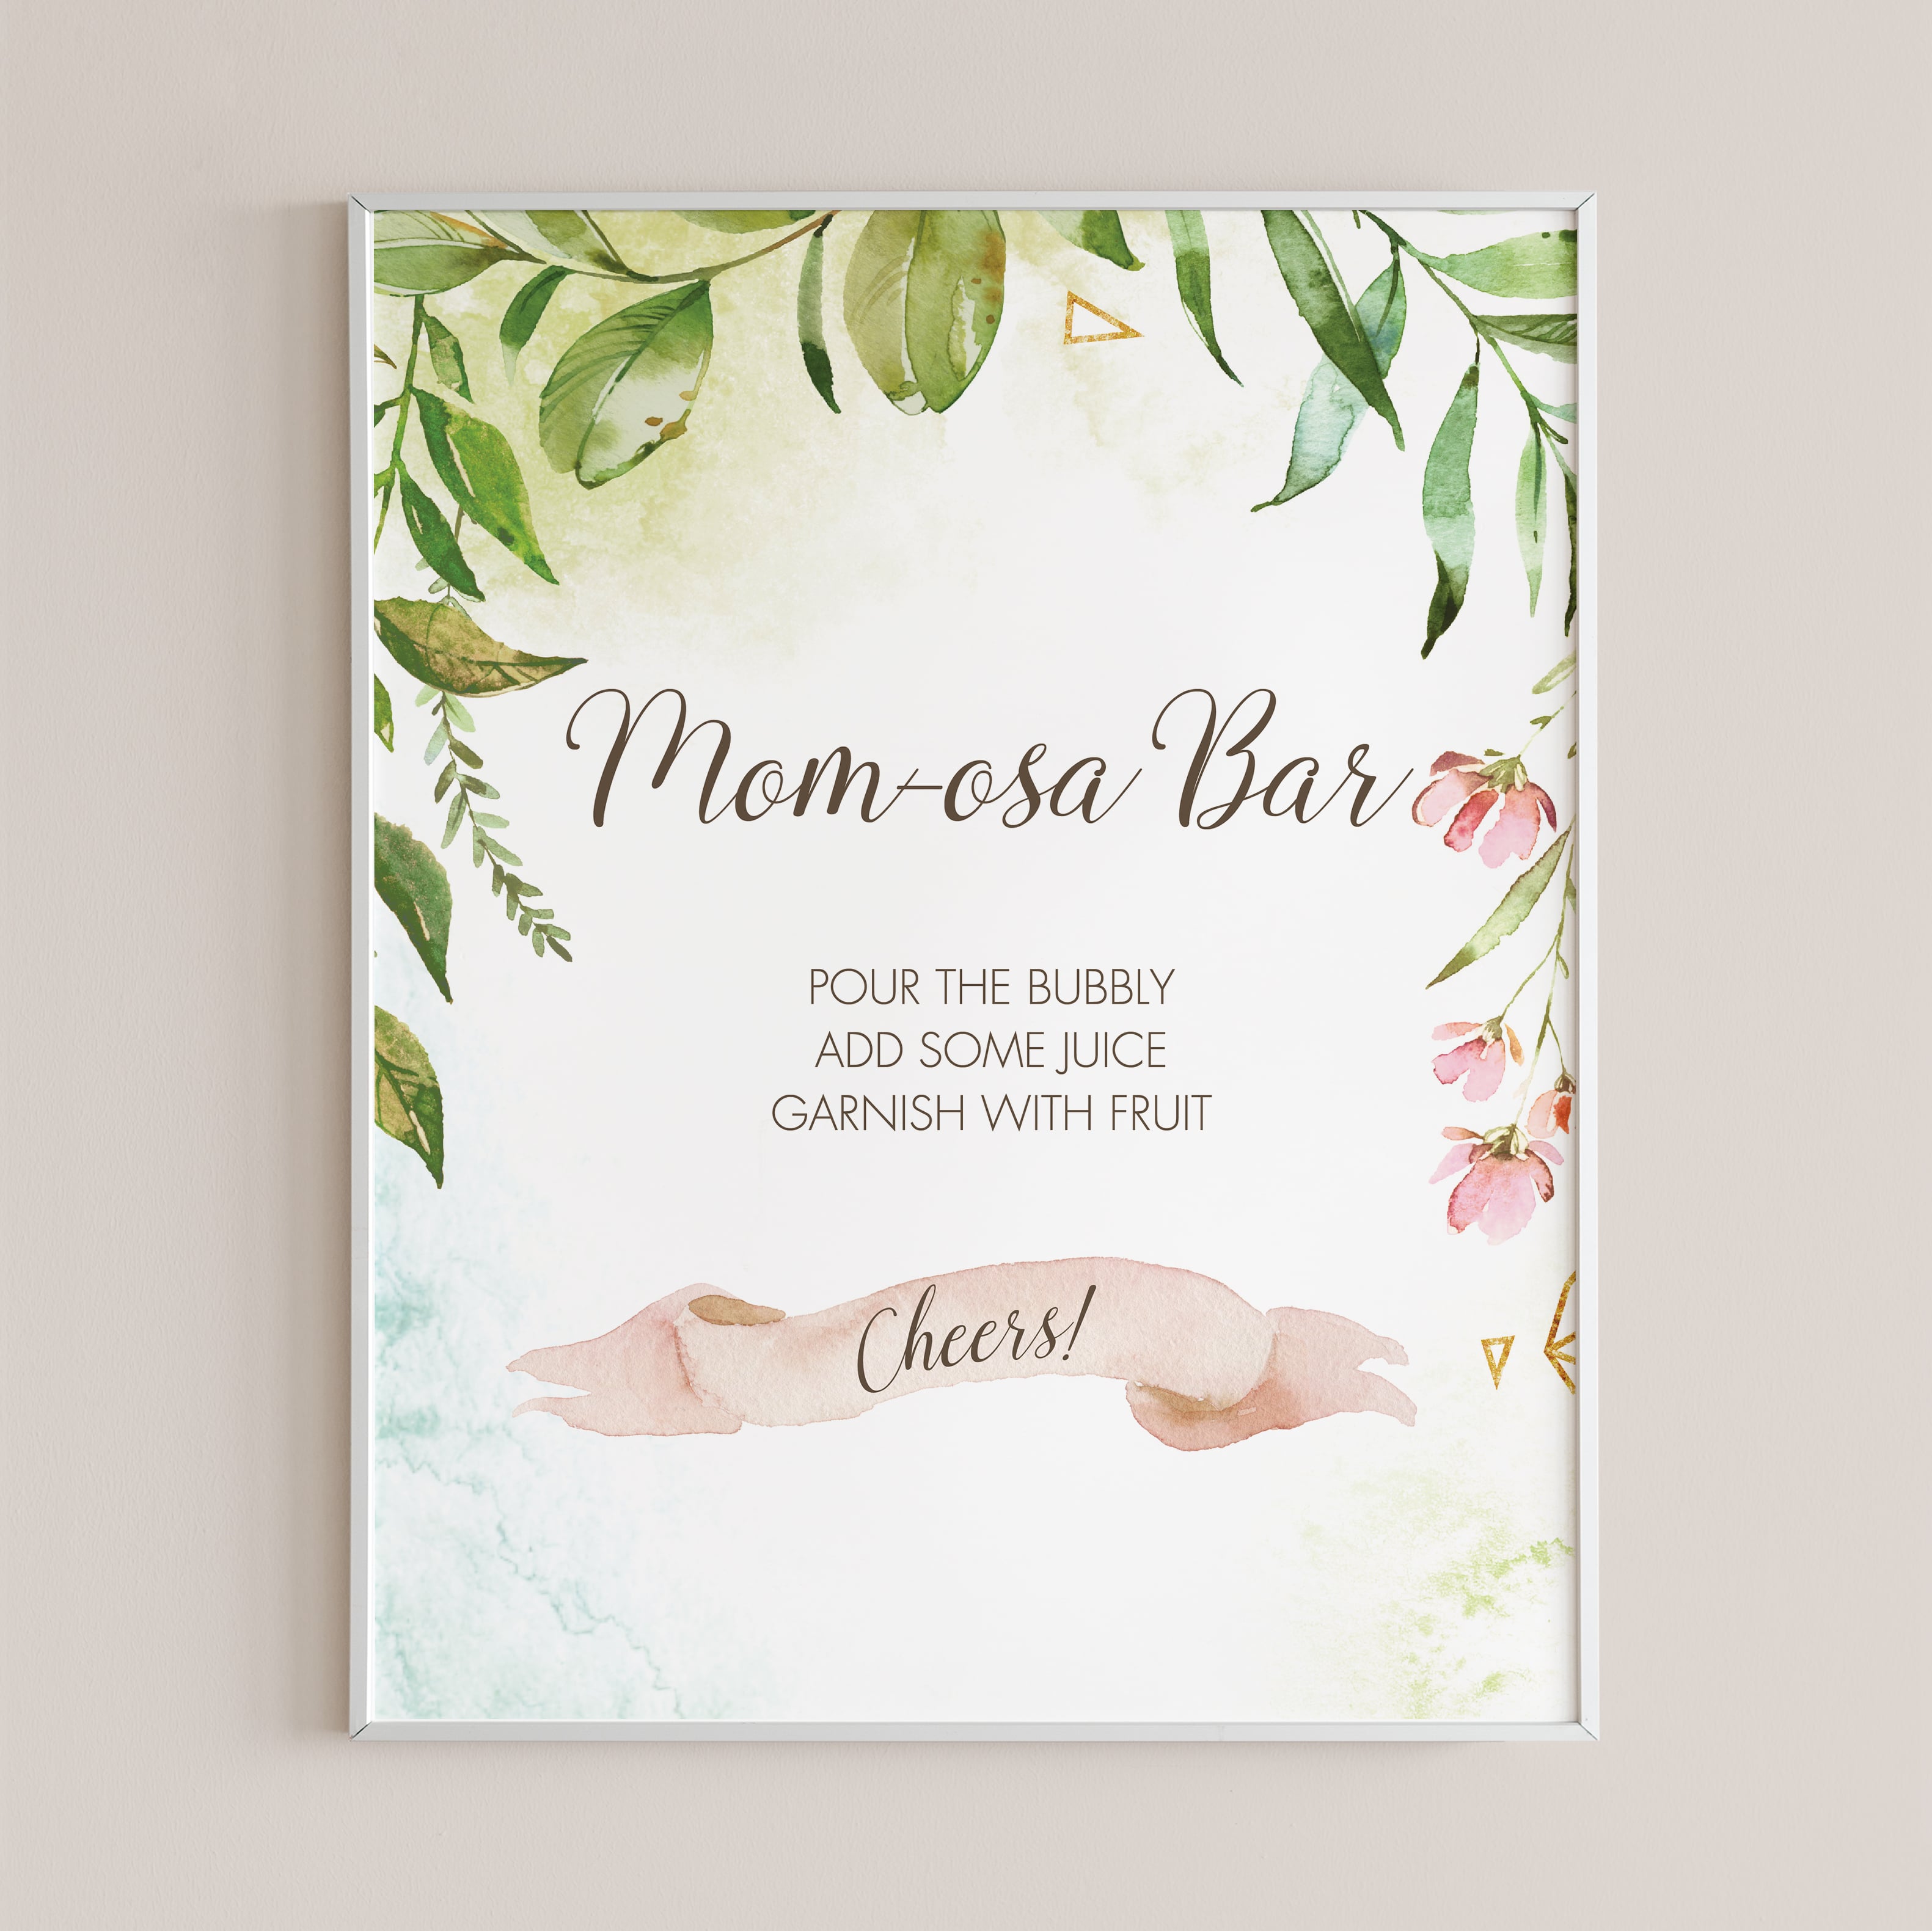 Mom-osa sign for baby brunch instant download by LittleSizzle